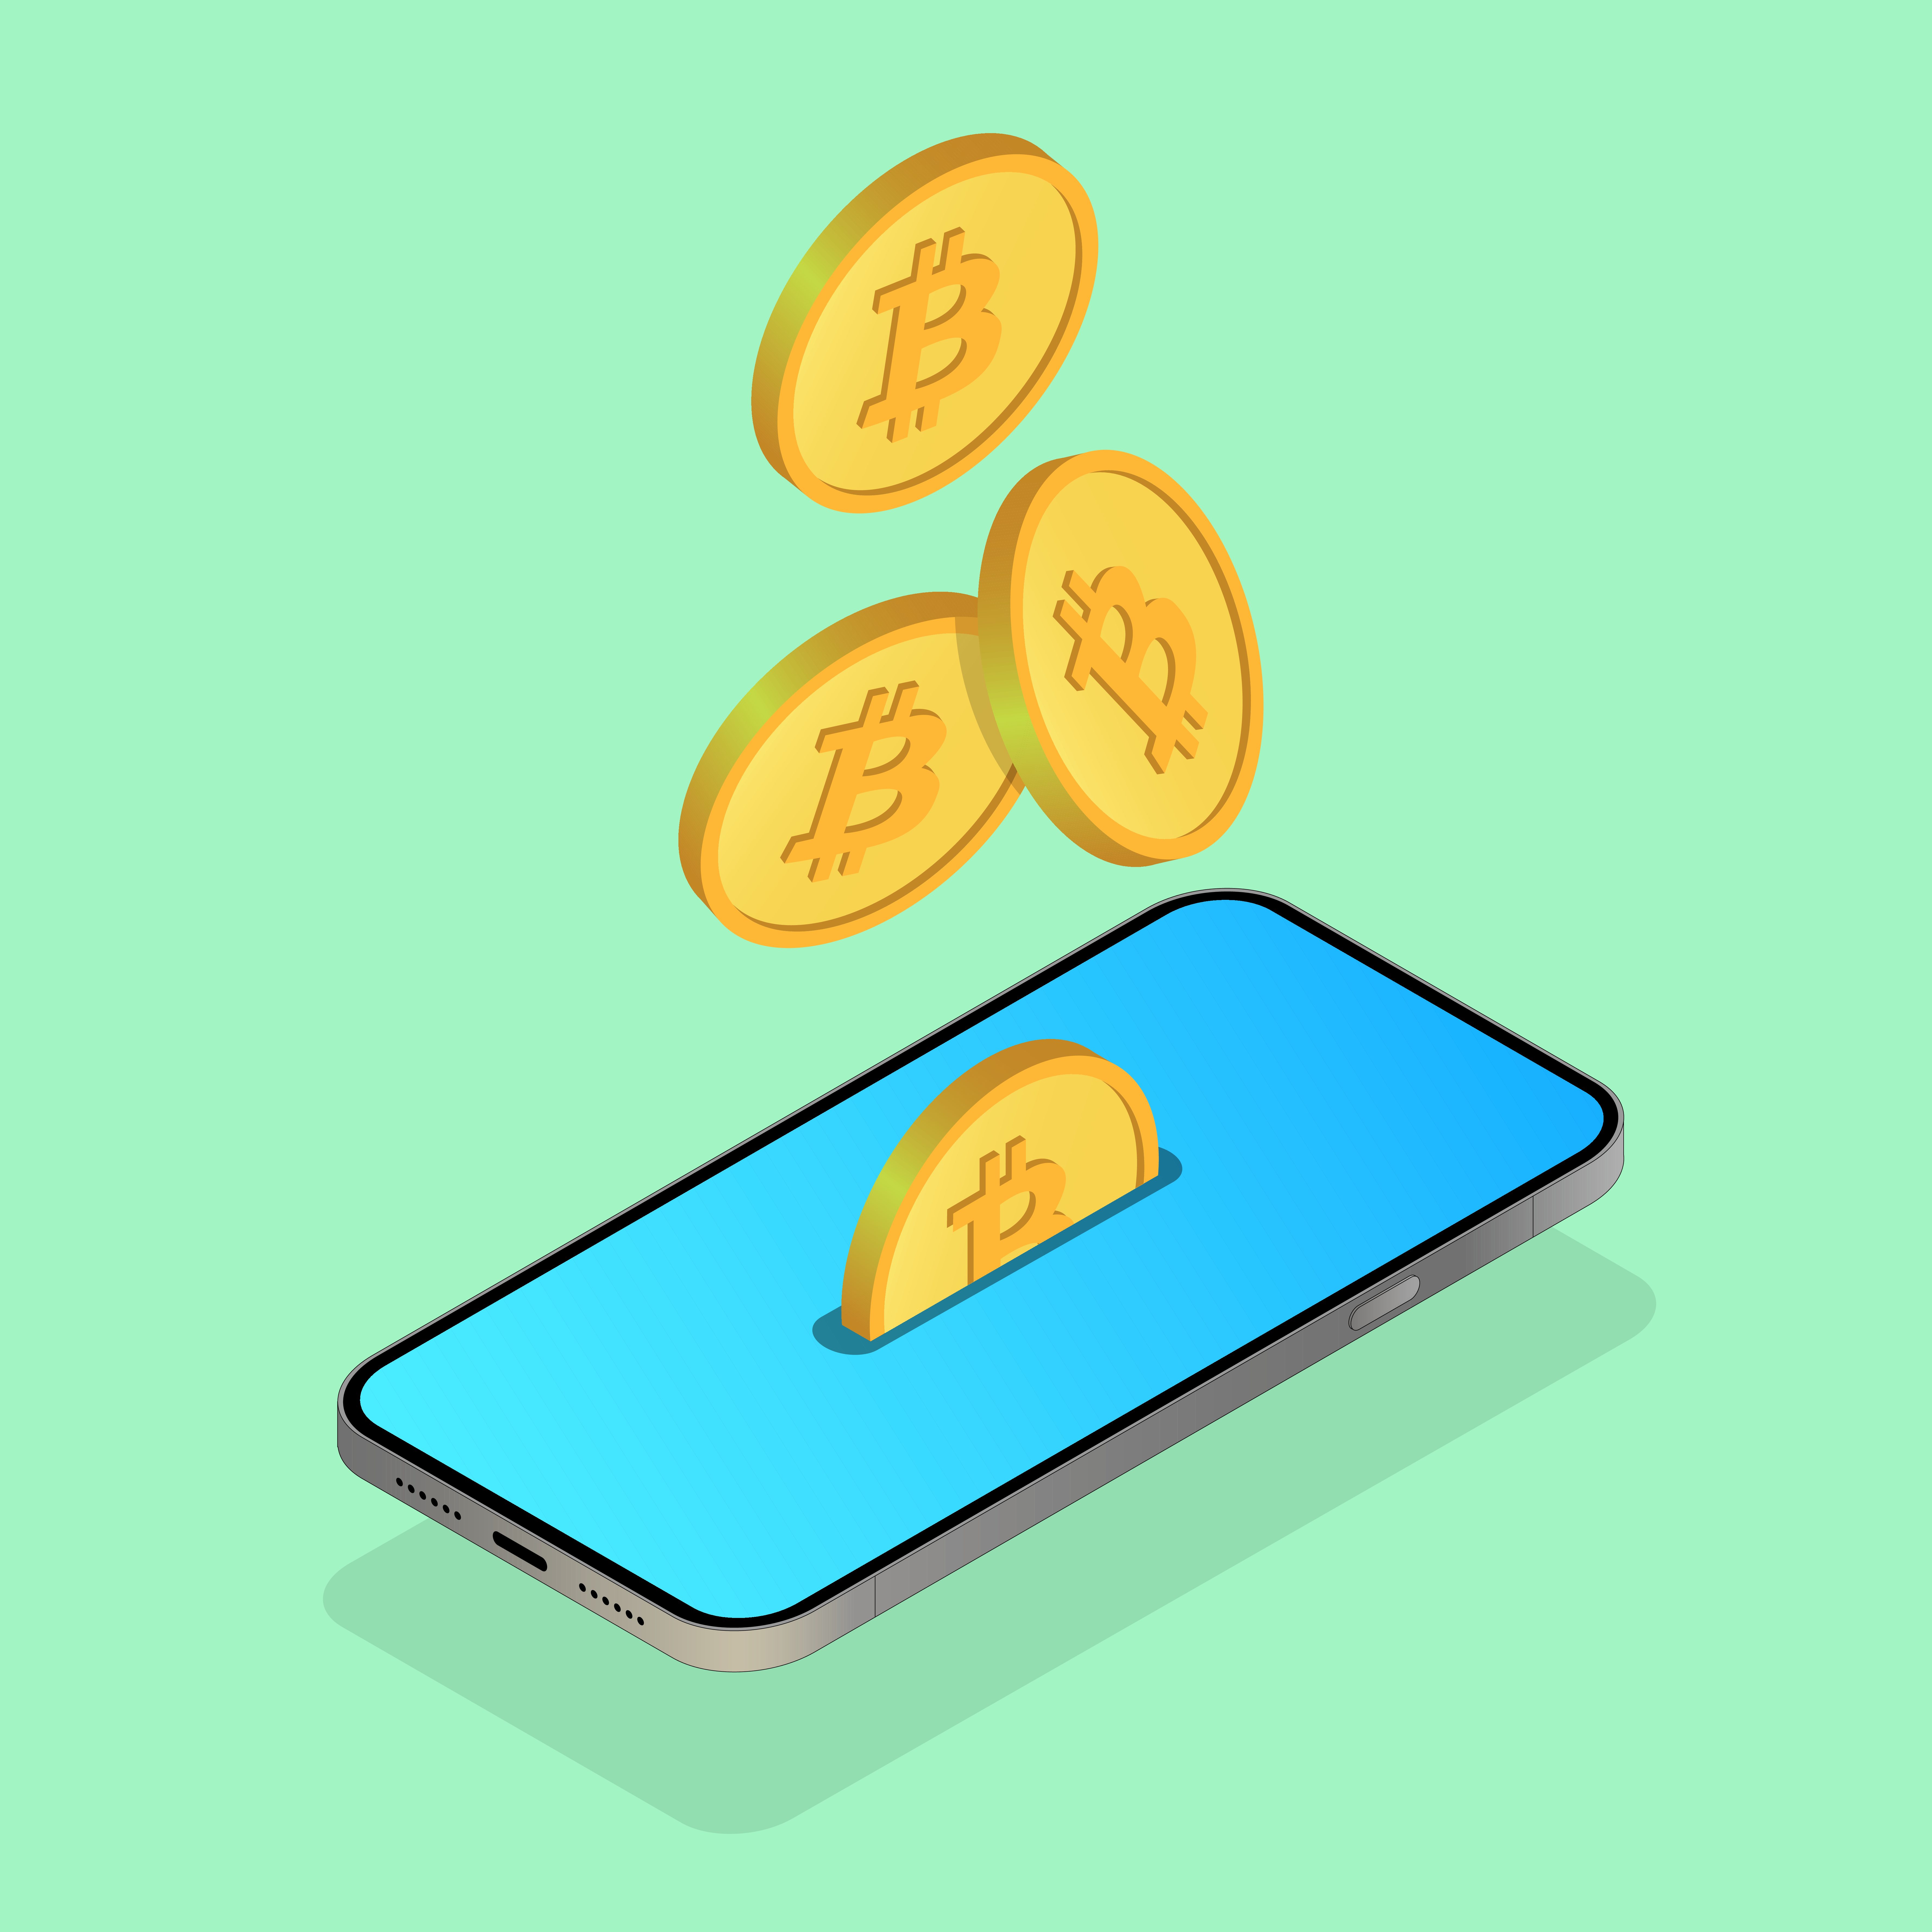 How can you mine crypto with your phone? Is it worth trying?